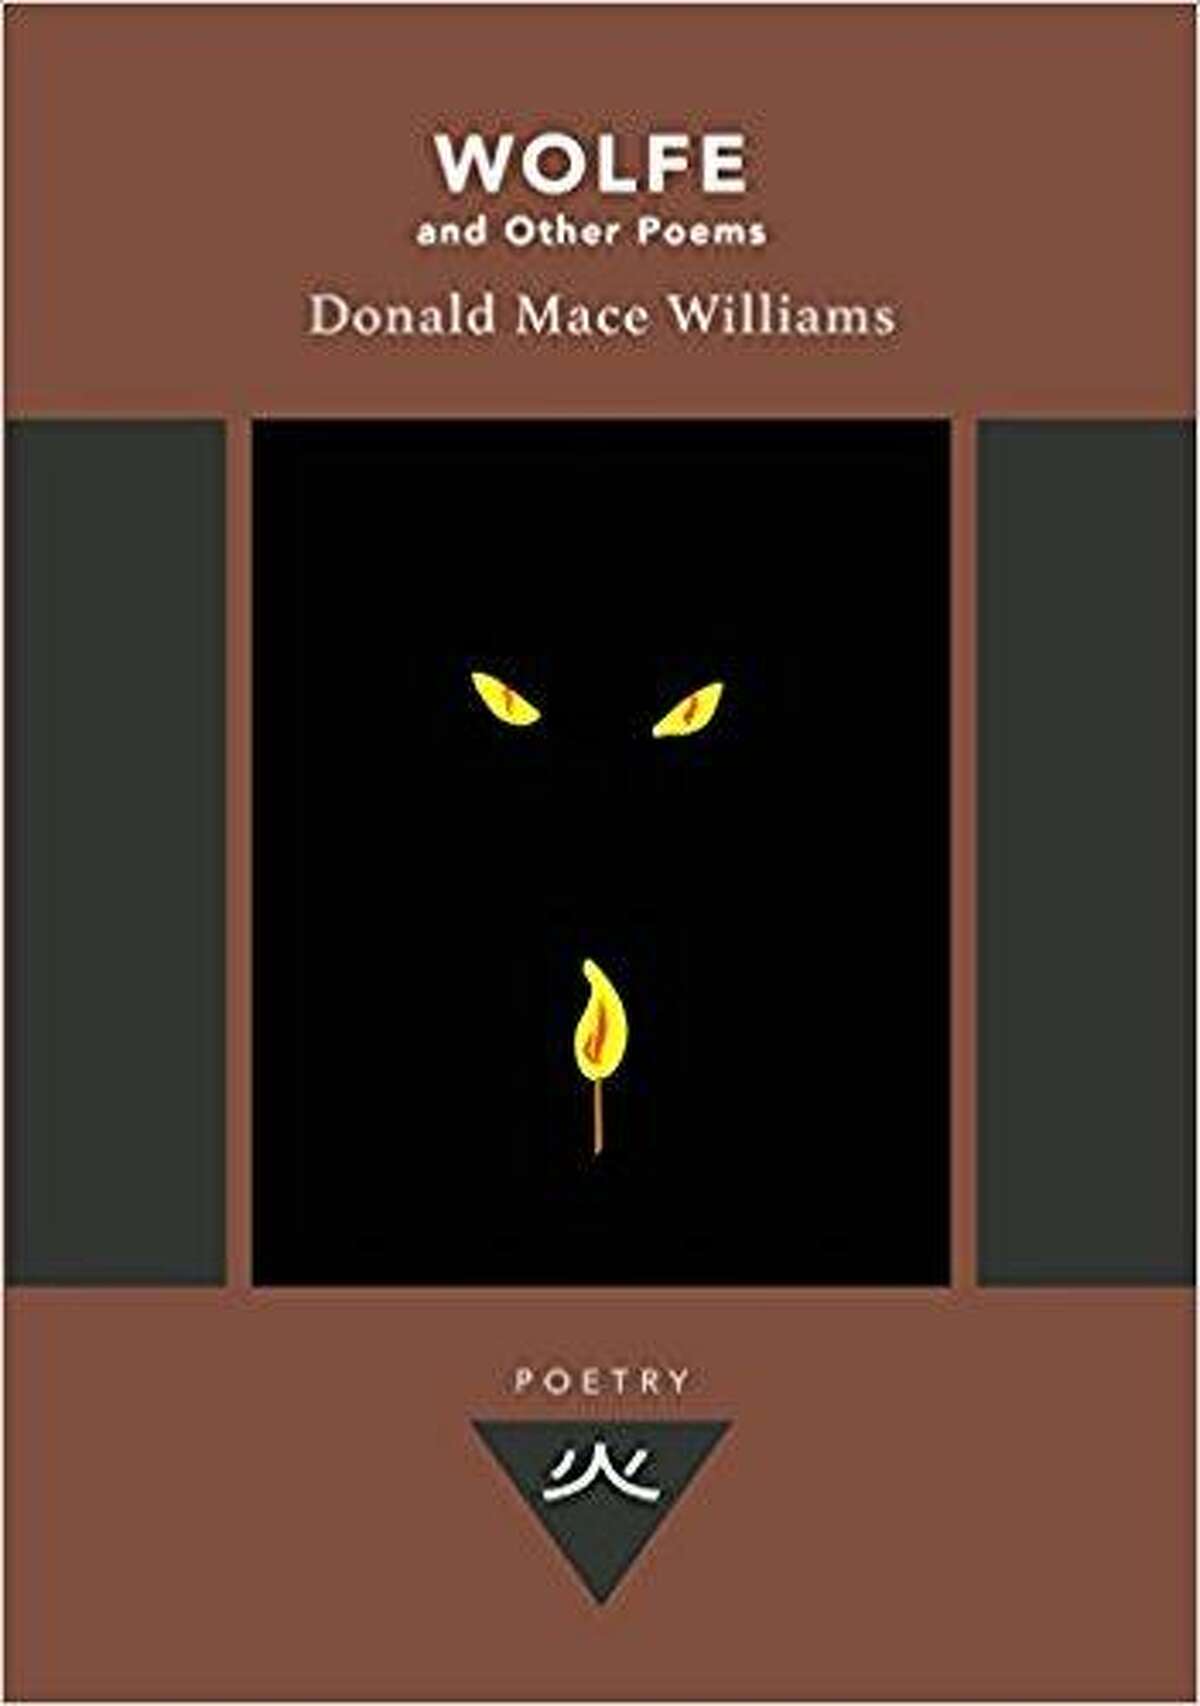 “Wolfe and Other Poems” by Donald Mace Williams